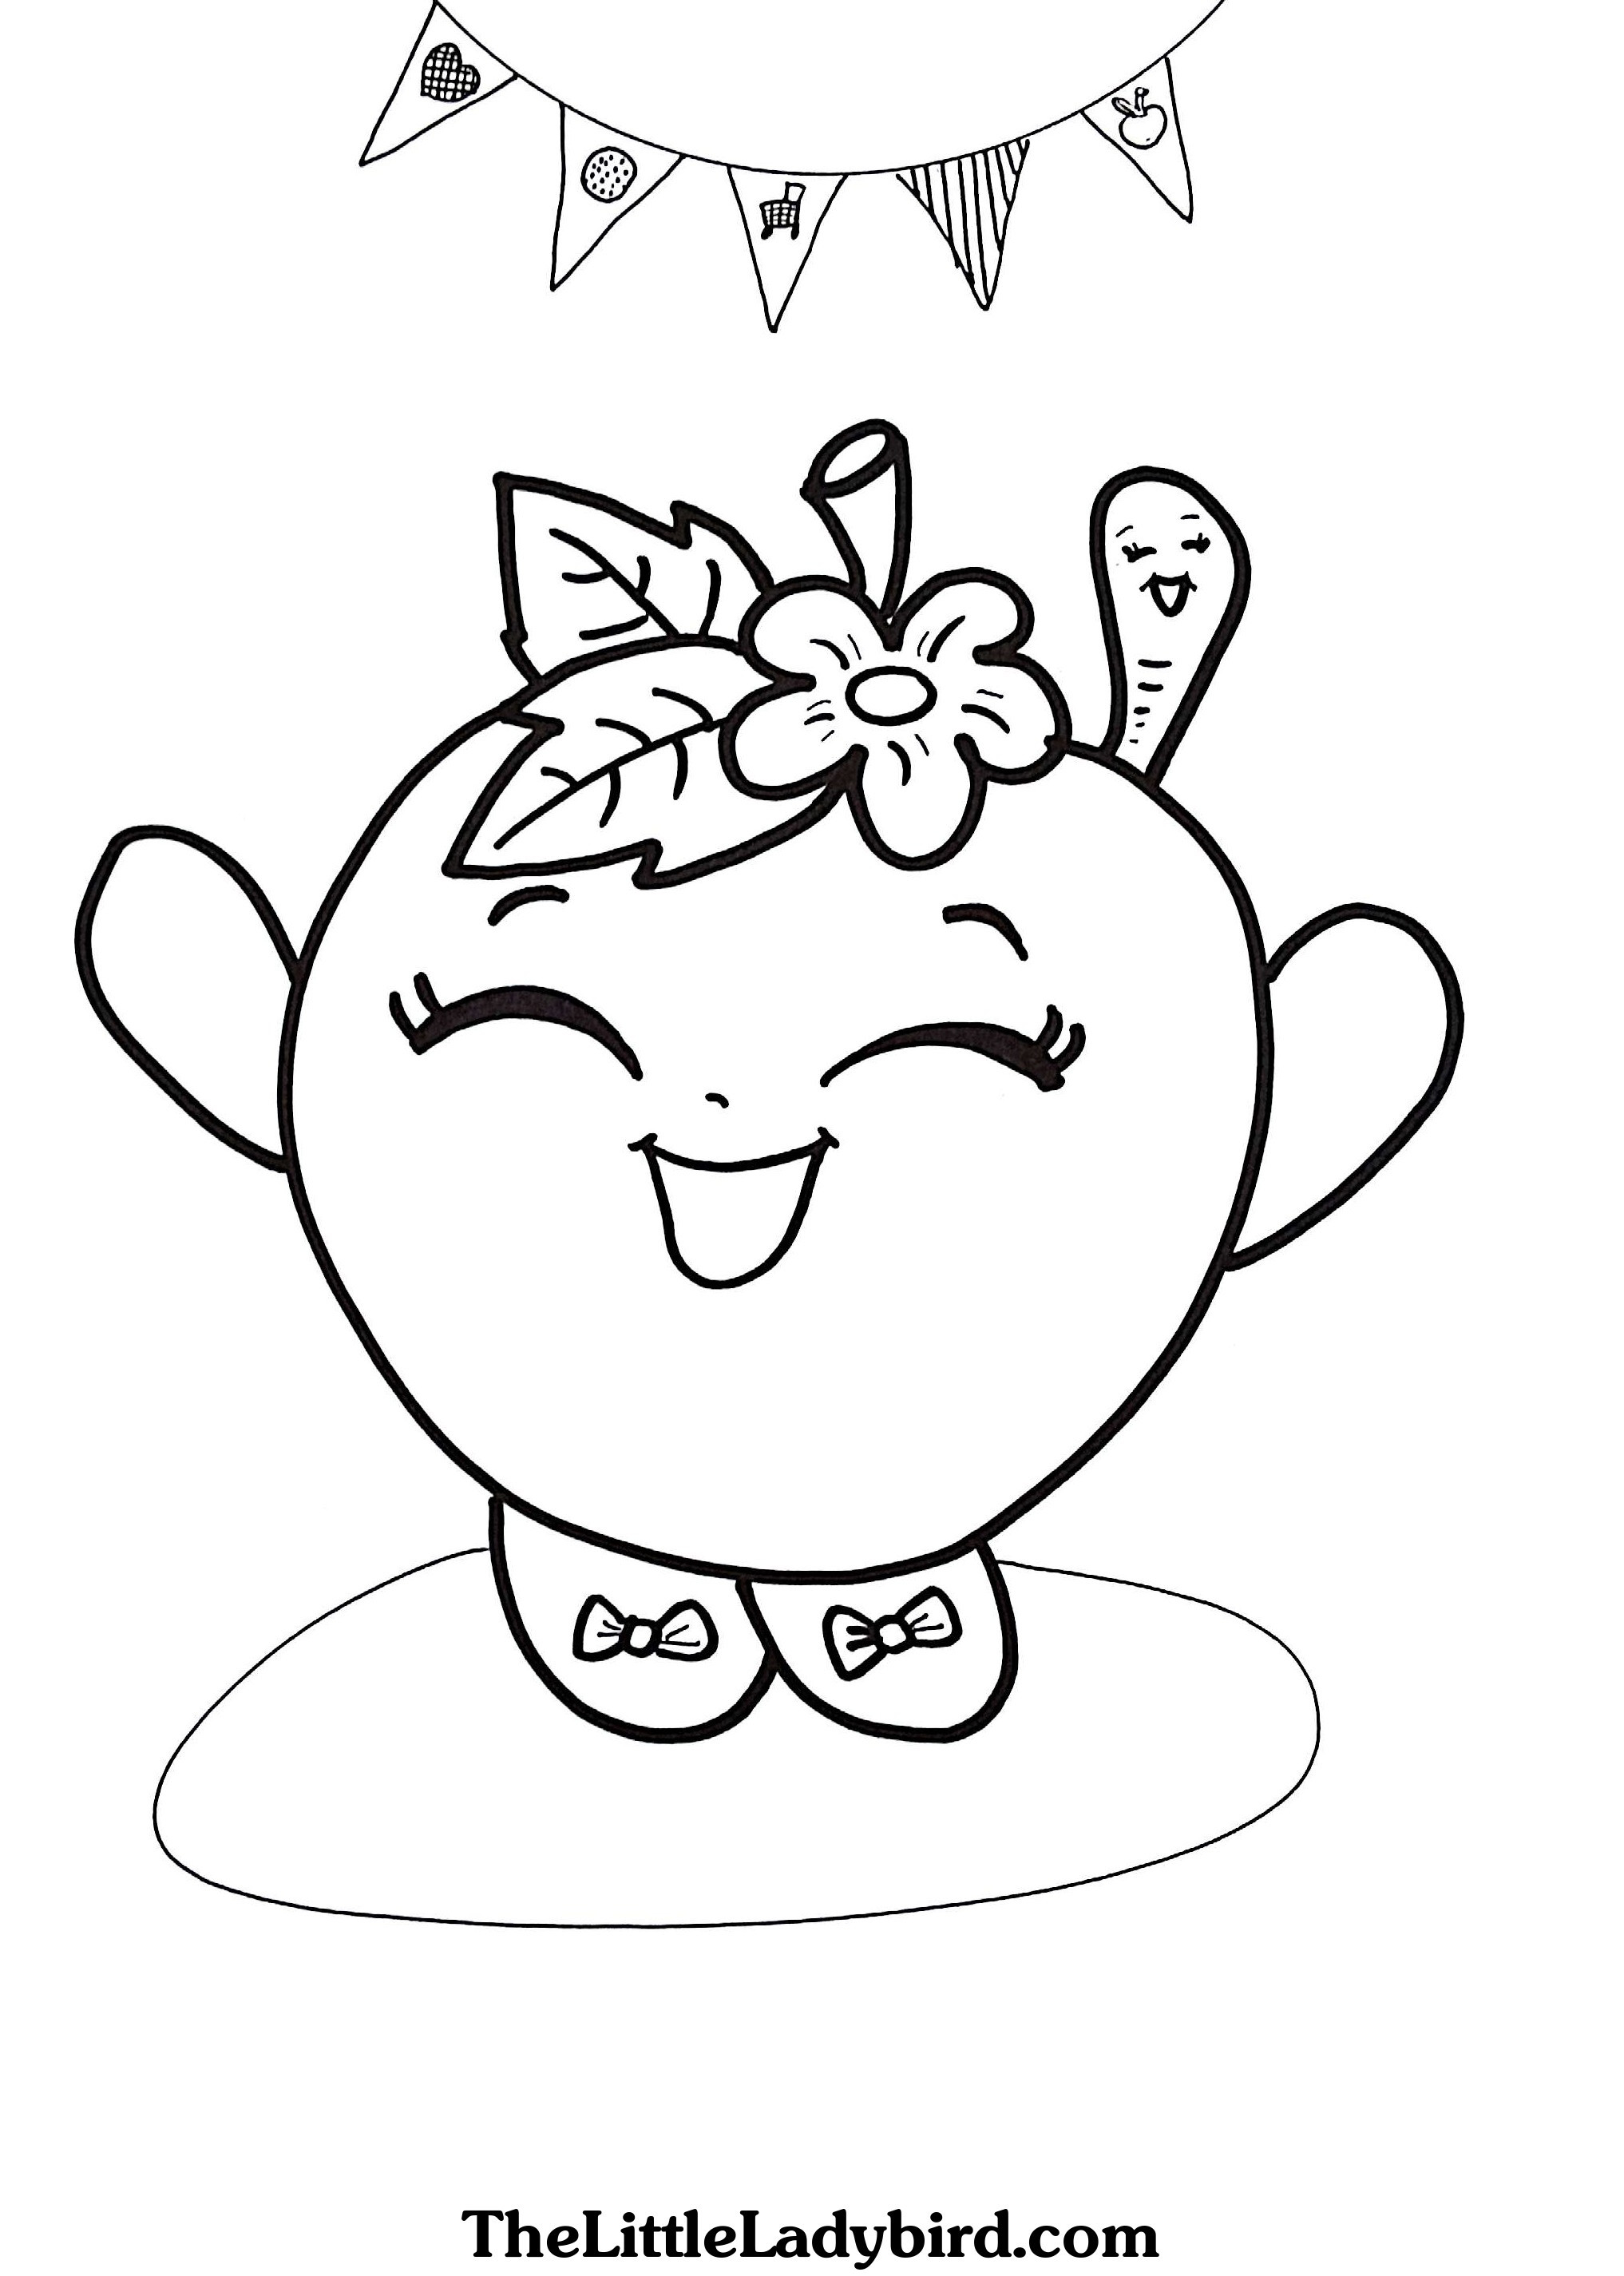 Coloring Pages For Girls Shopkins Apple
 Coloring Pages For Girls Shopkins Apple Download 2